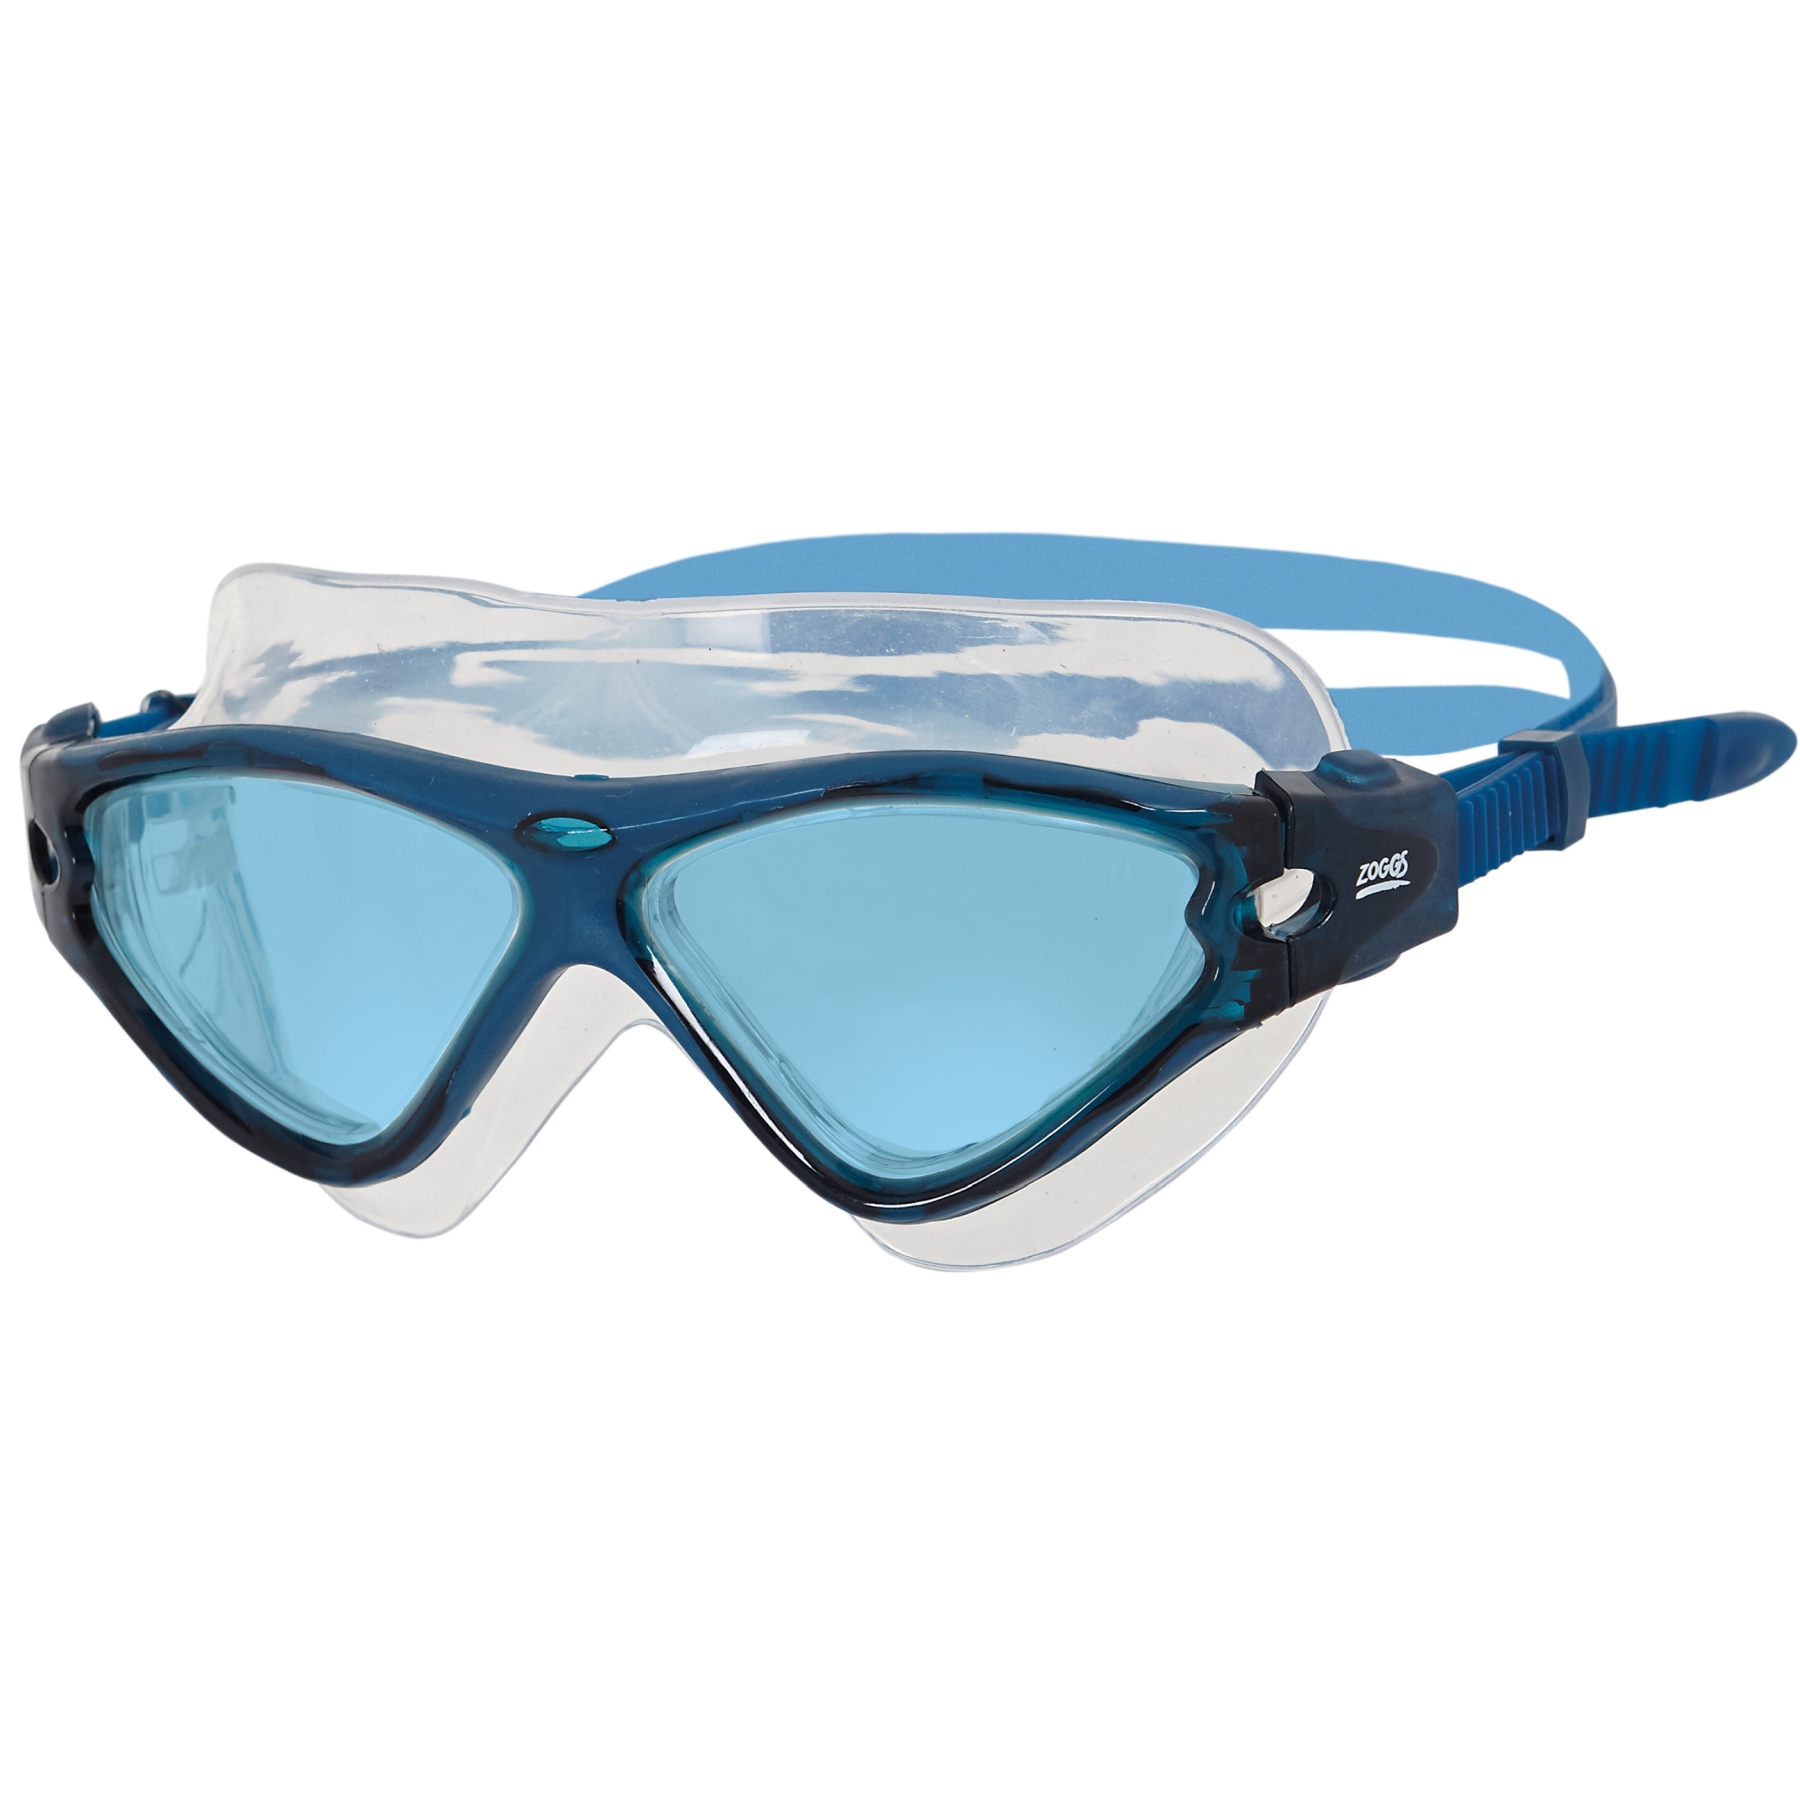 Picture of Zoggs Tri-Vision Mask Swimming Goggles - navy/blue/tint